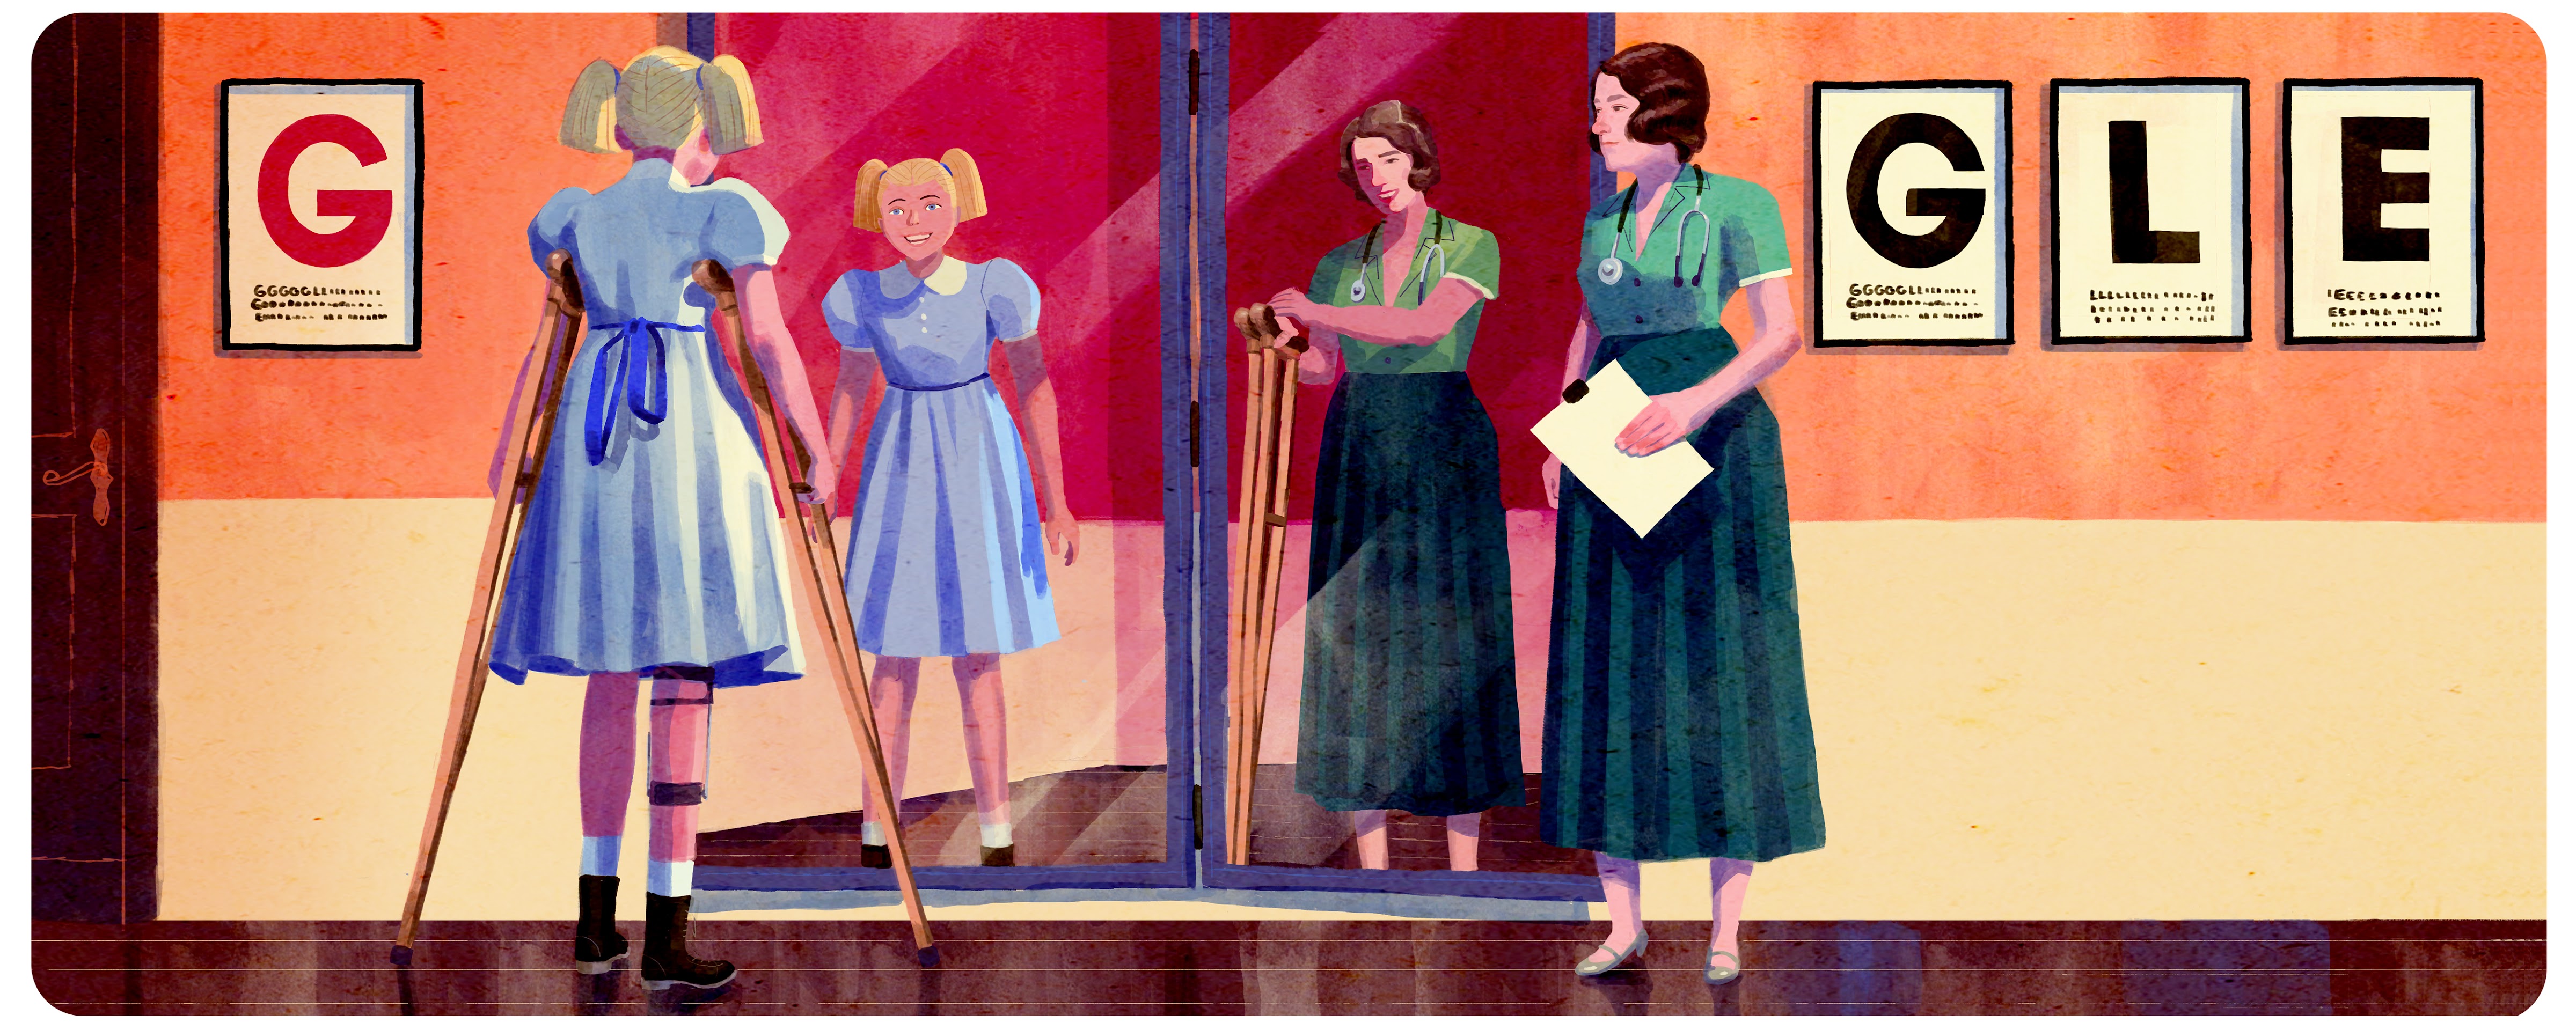 Illustrated Google Doodle for Dame Jean Macnamara's 121st birthday showing girl on crutches looking into a mirror where the crutches are invisible.